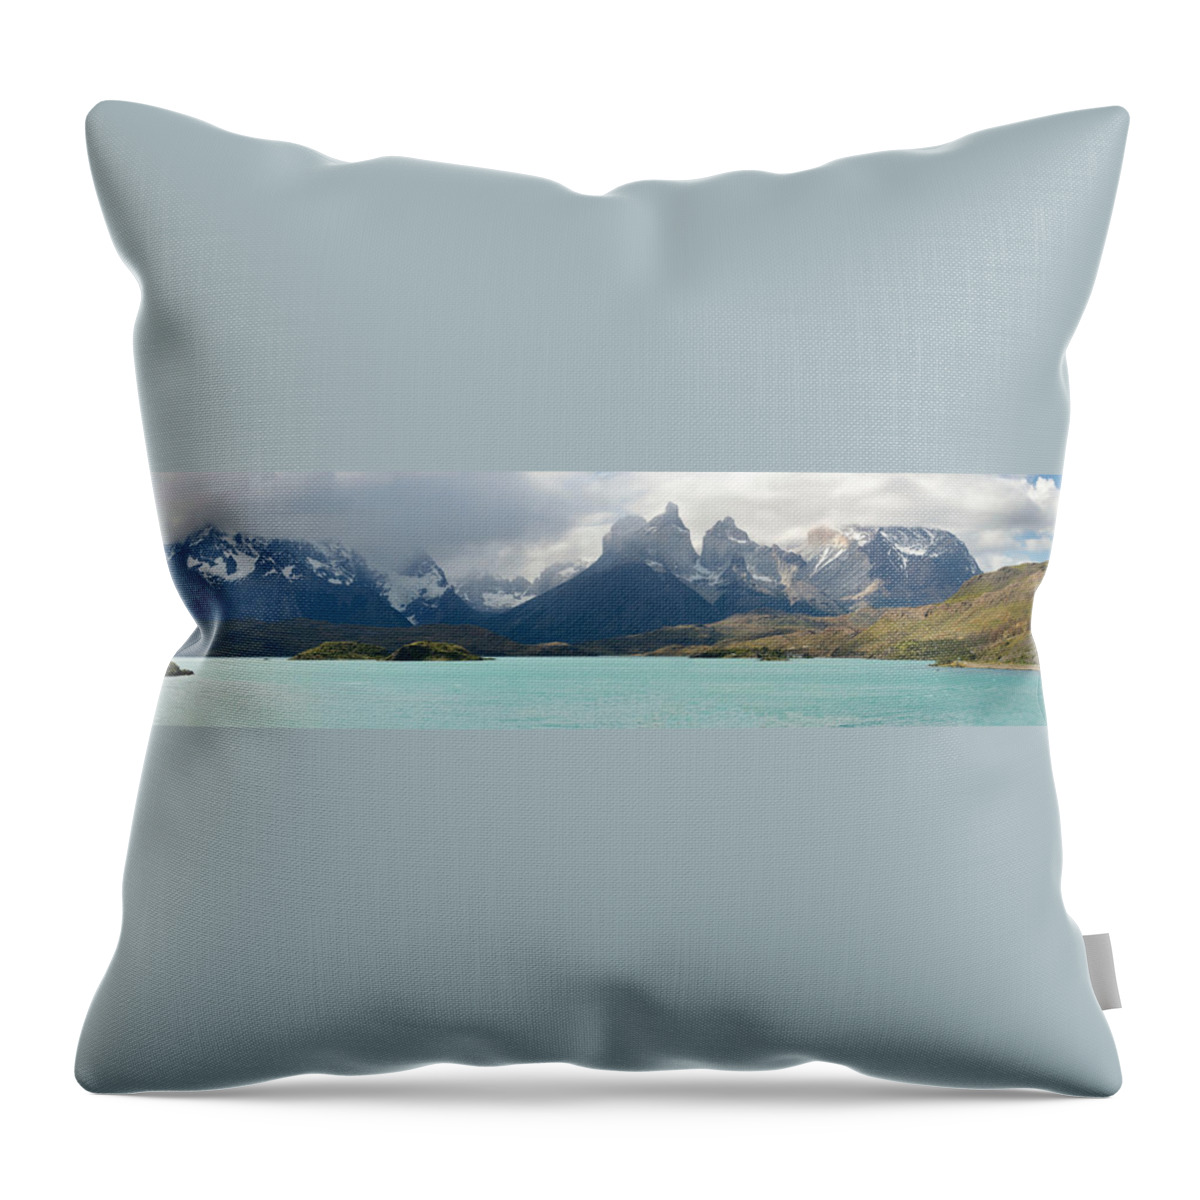 Home Throw Pillow featuring the photograph Los Cuernos by Richard Gehlbach